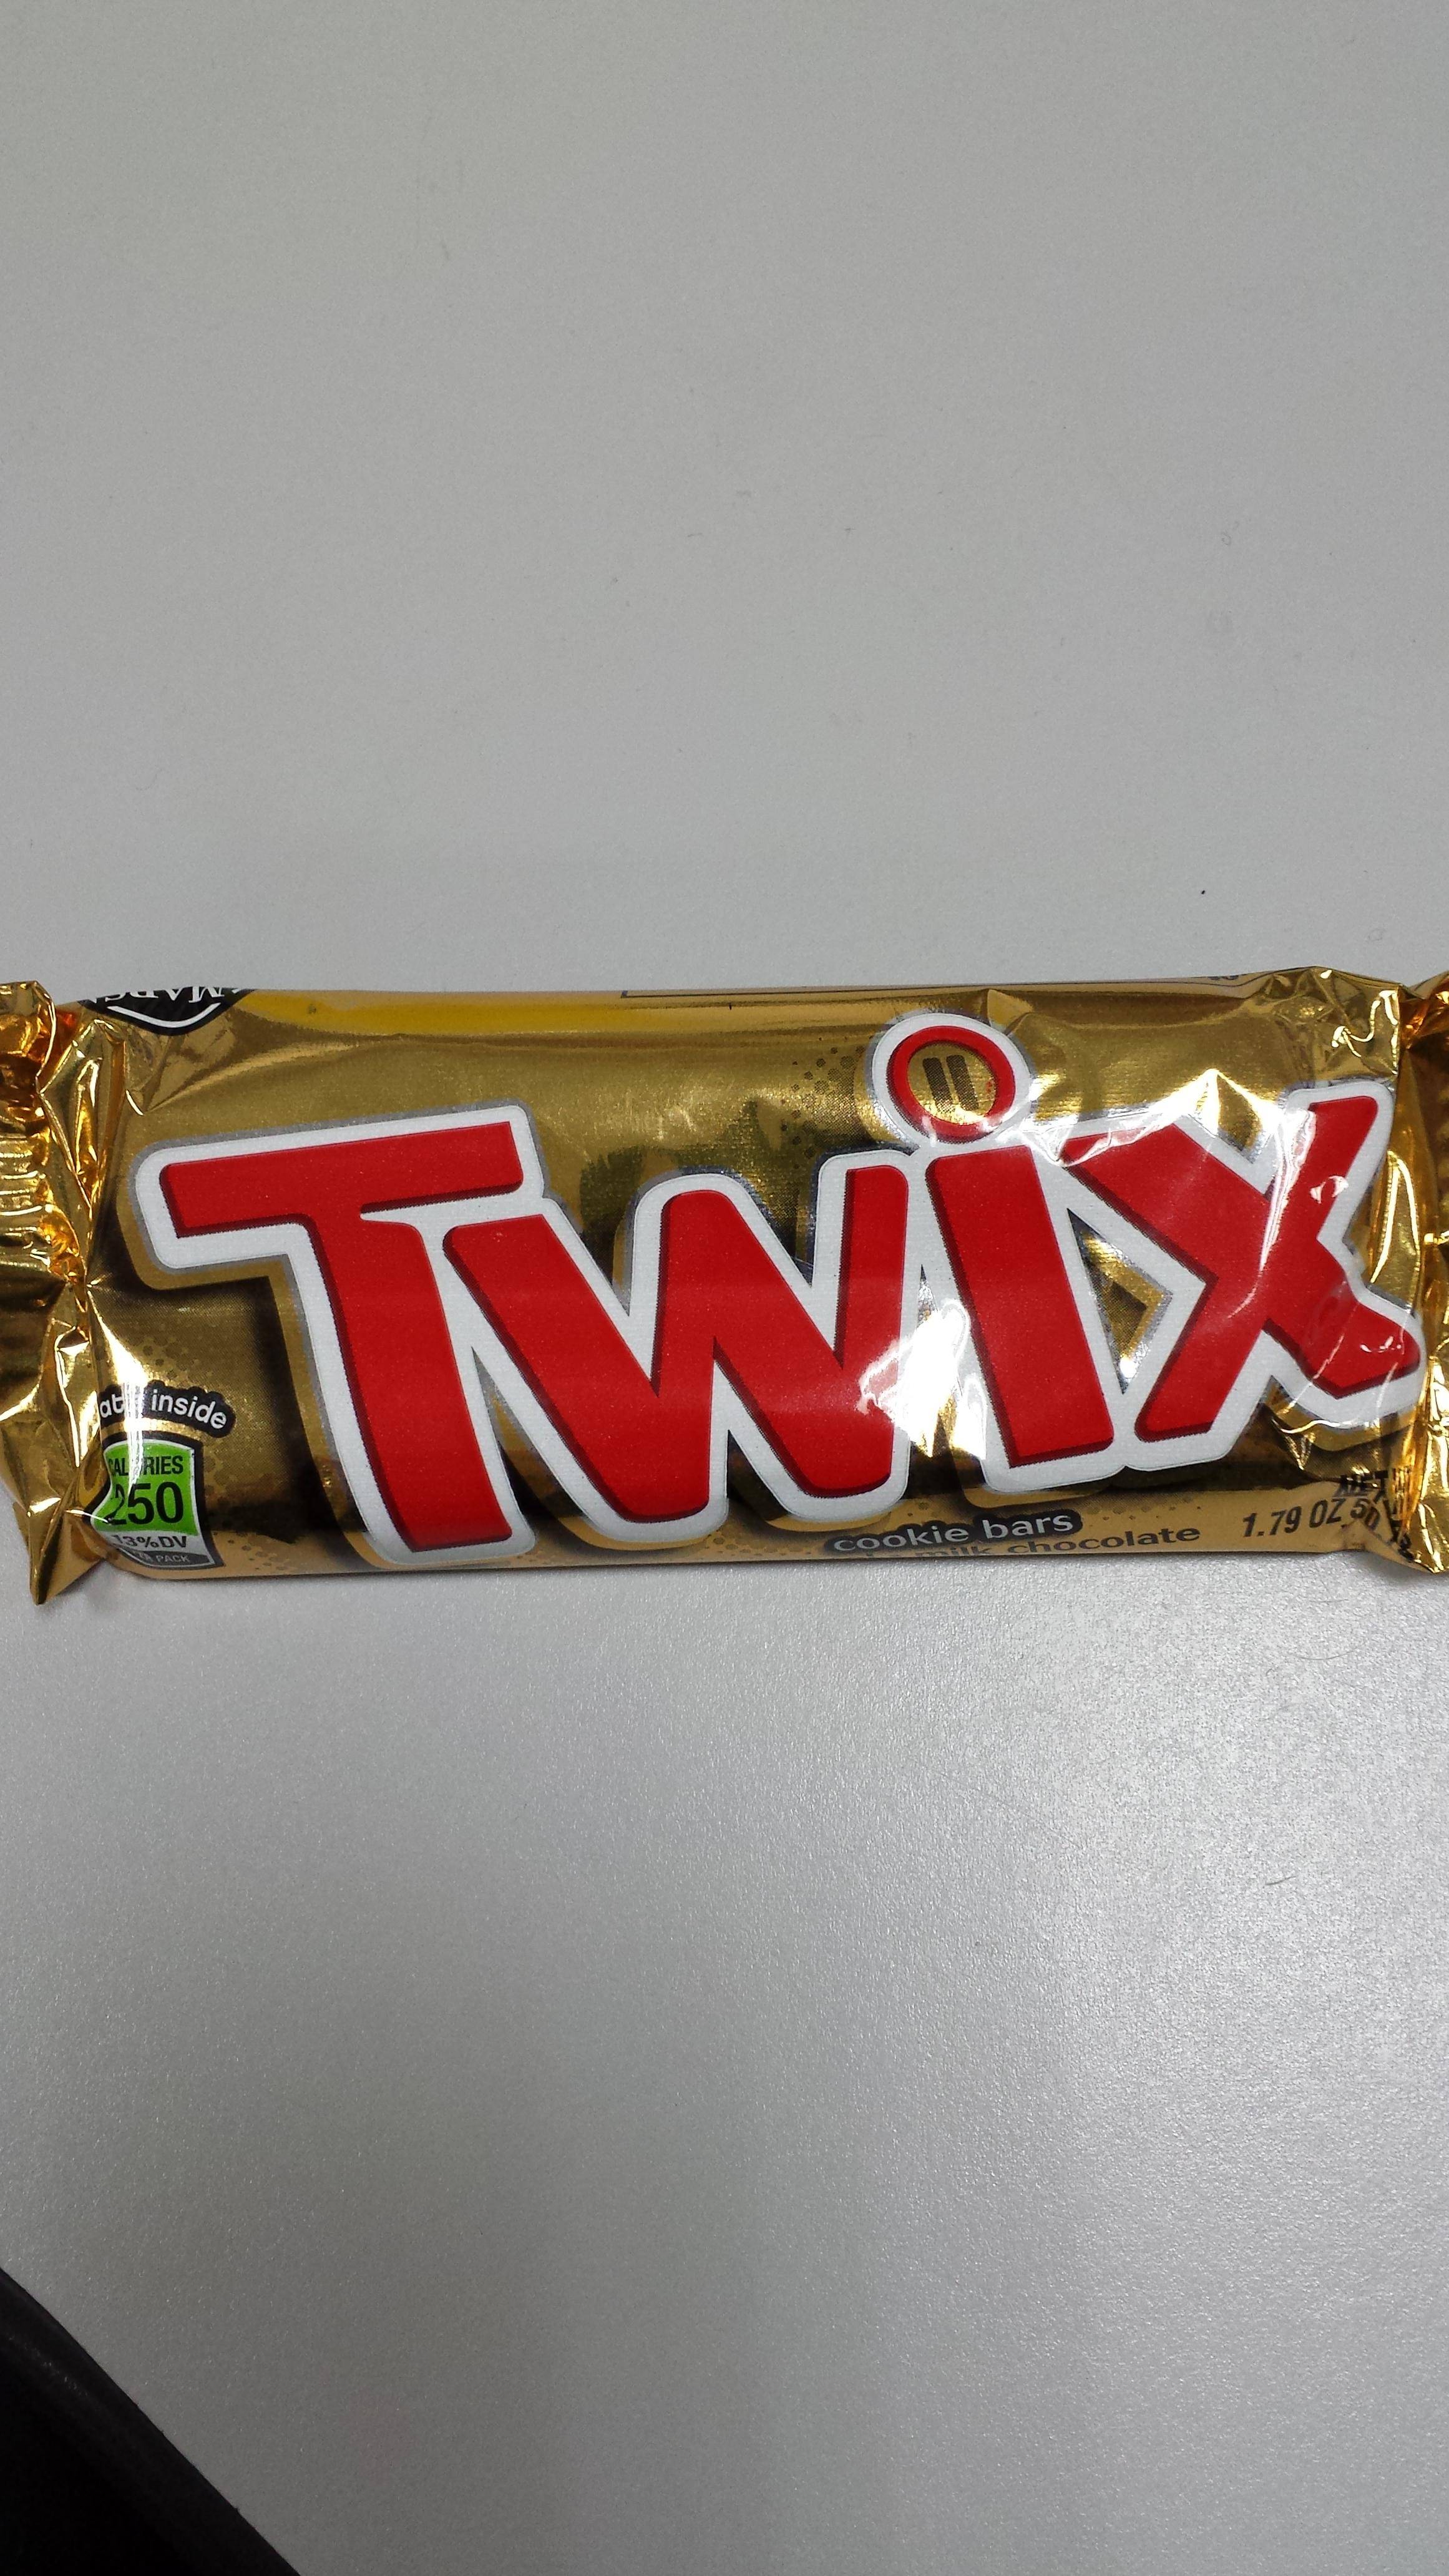 Twix Logo - The dot over the i in the Twix logo has Twix bars in it